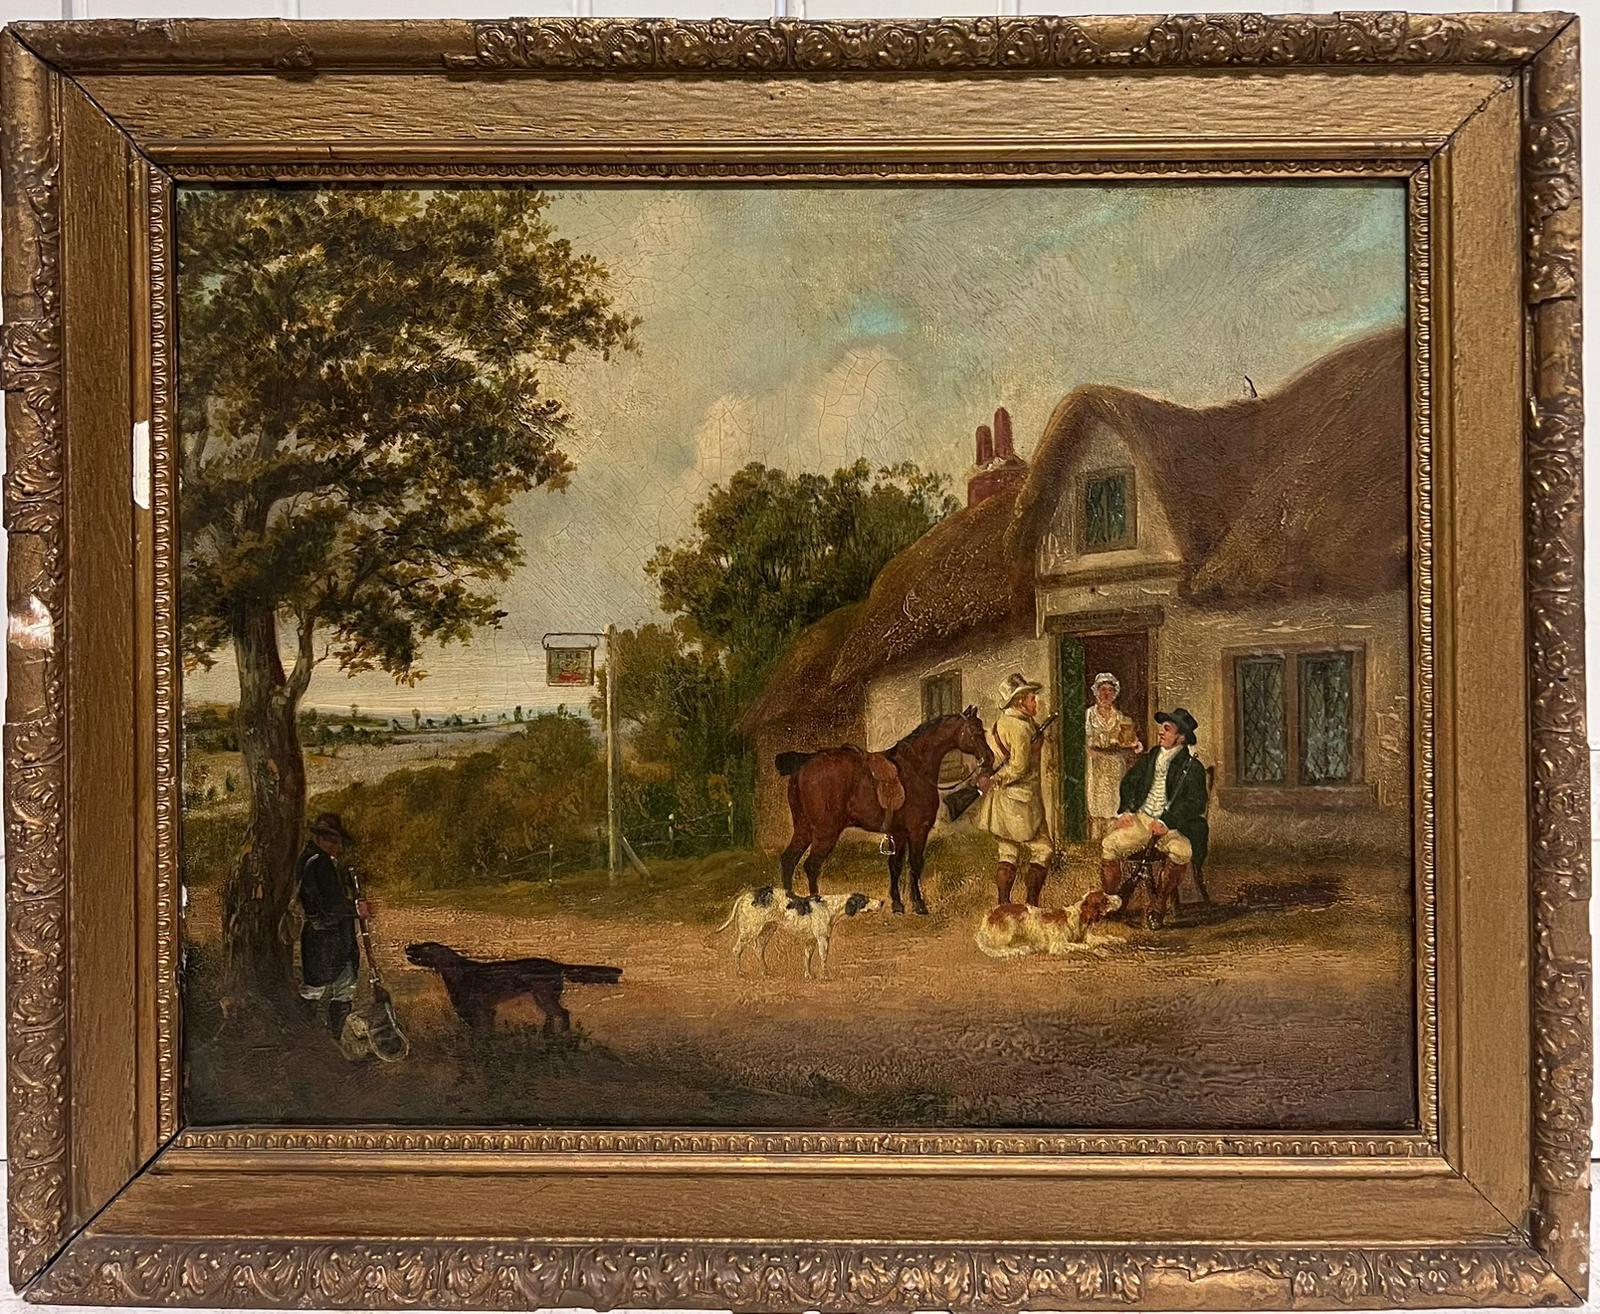 The Village Tavern
Attributed to Dean Wolstenholme Snr (1757-1837)
oil on canvas, framed
framed: 18 x 22 inches
canvas: 14 x 18 inches
provenance: private collection, UK
condition: a few light scuffs to the surface and the antique gilt frame is a